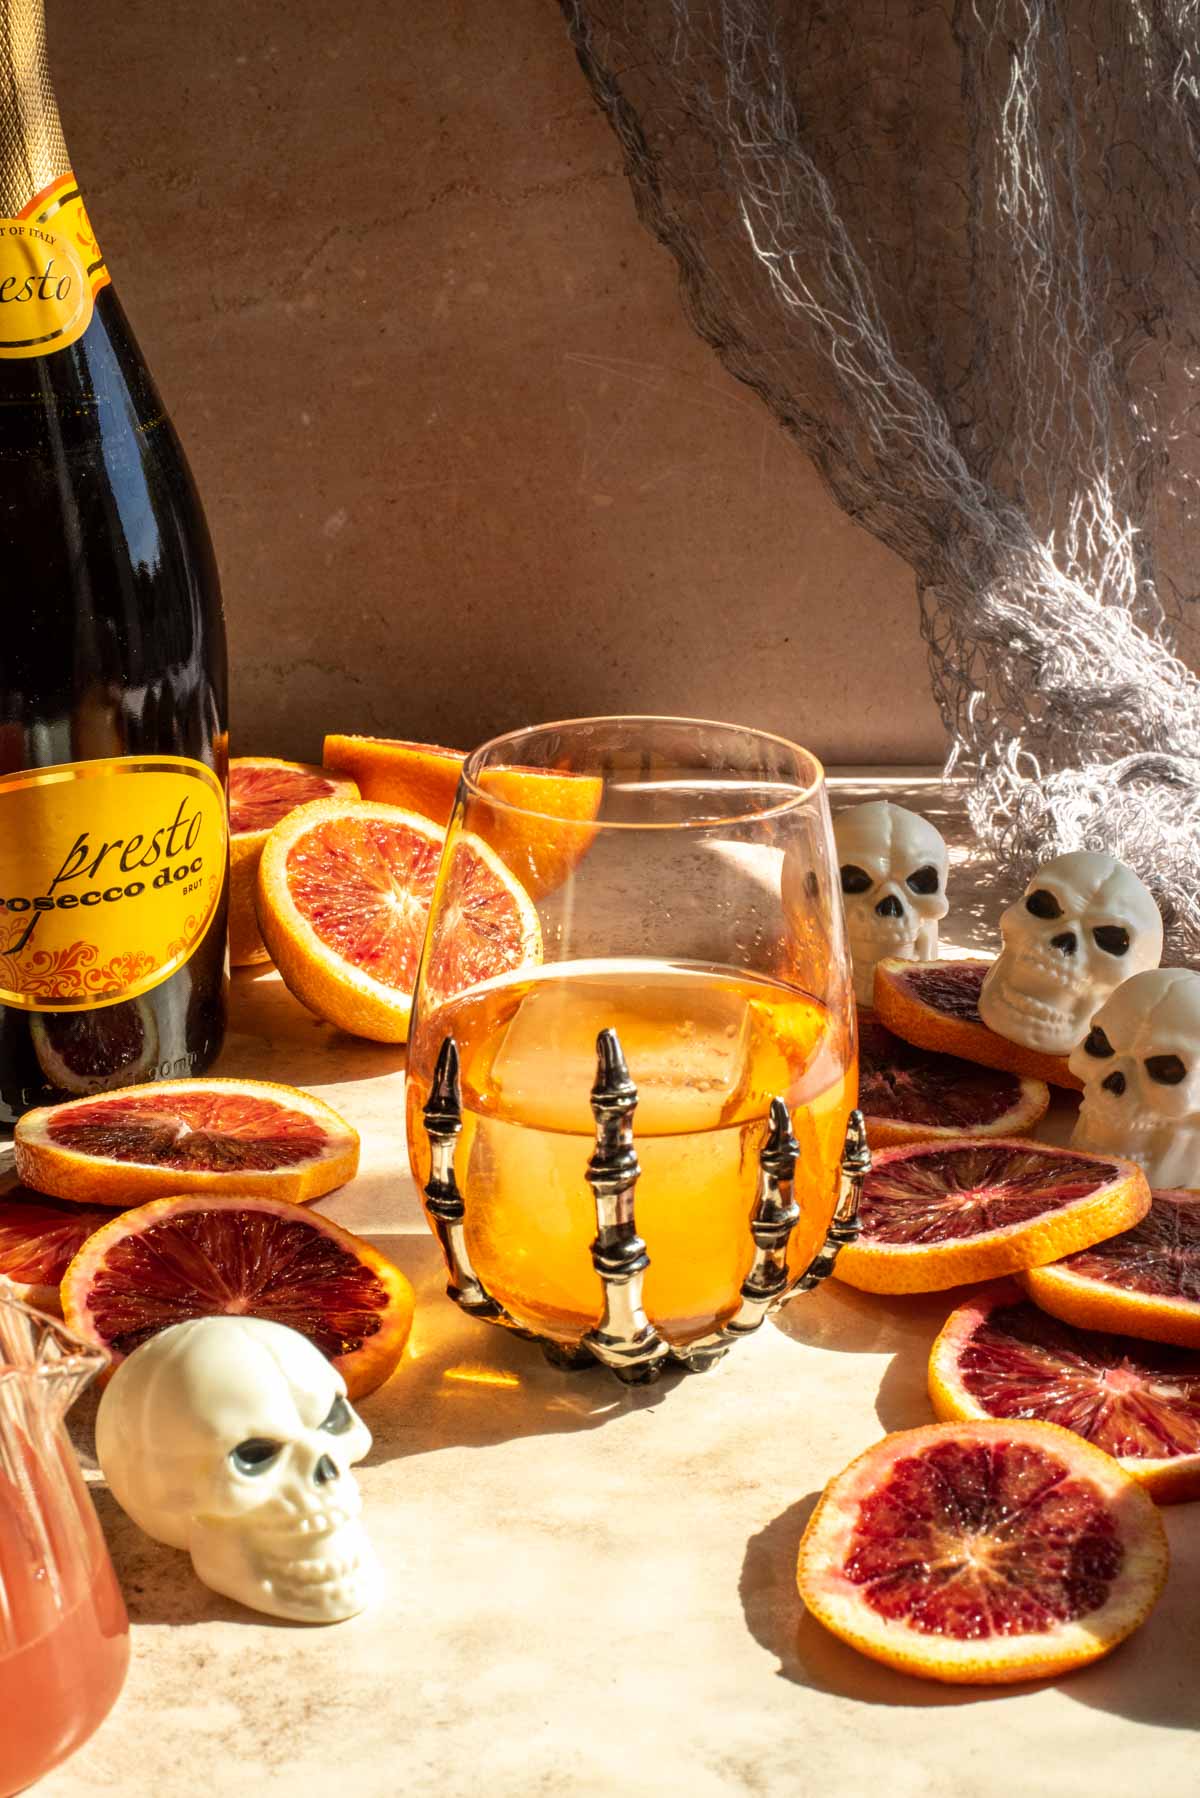 A skeleton hand wine glass with ice and aperol in it. It is also surrounded by blood orange slices.